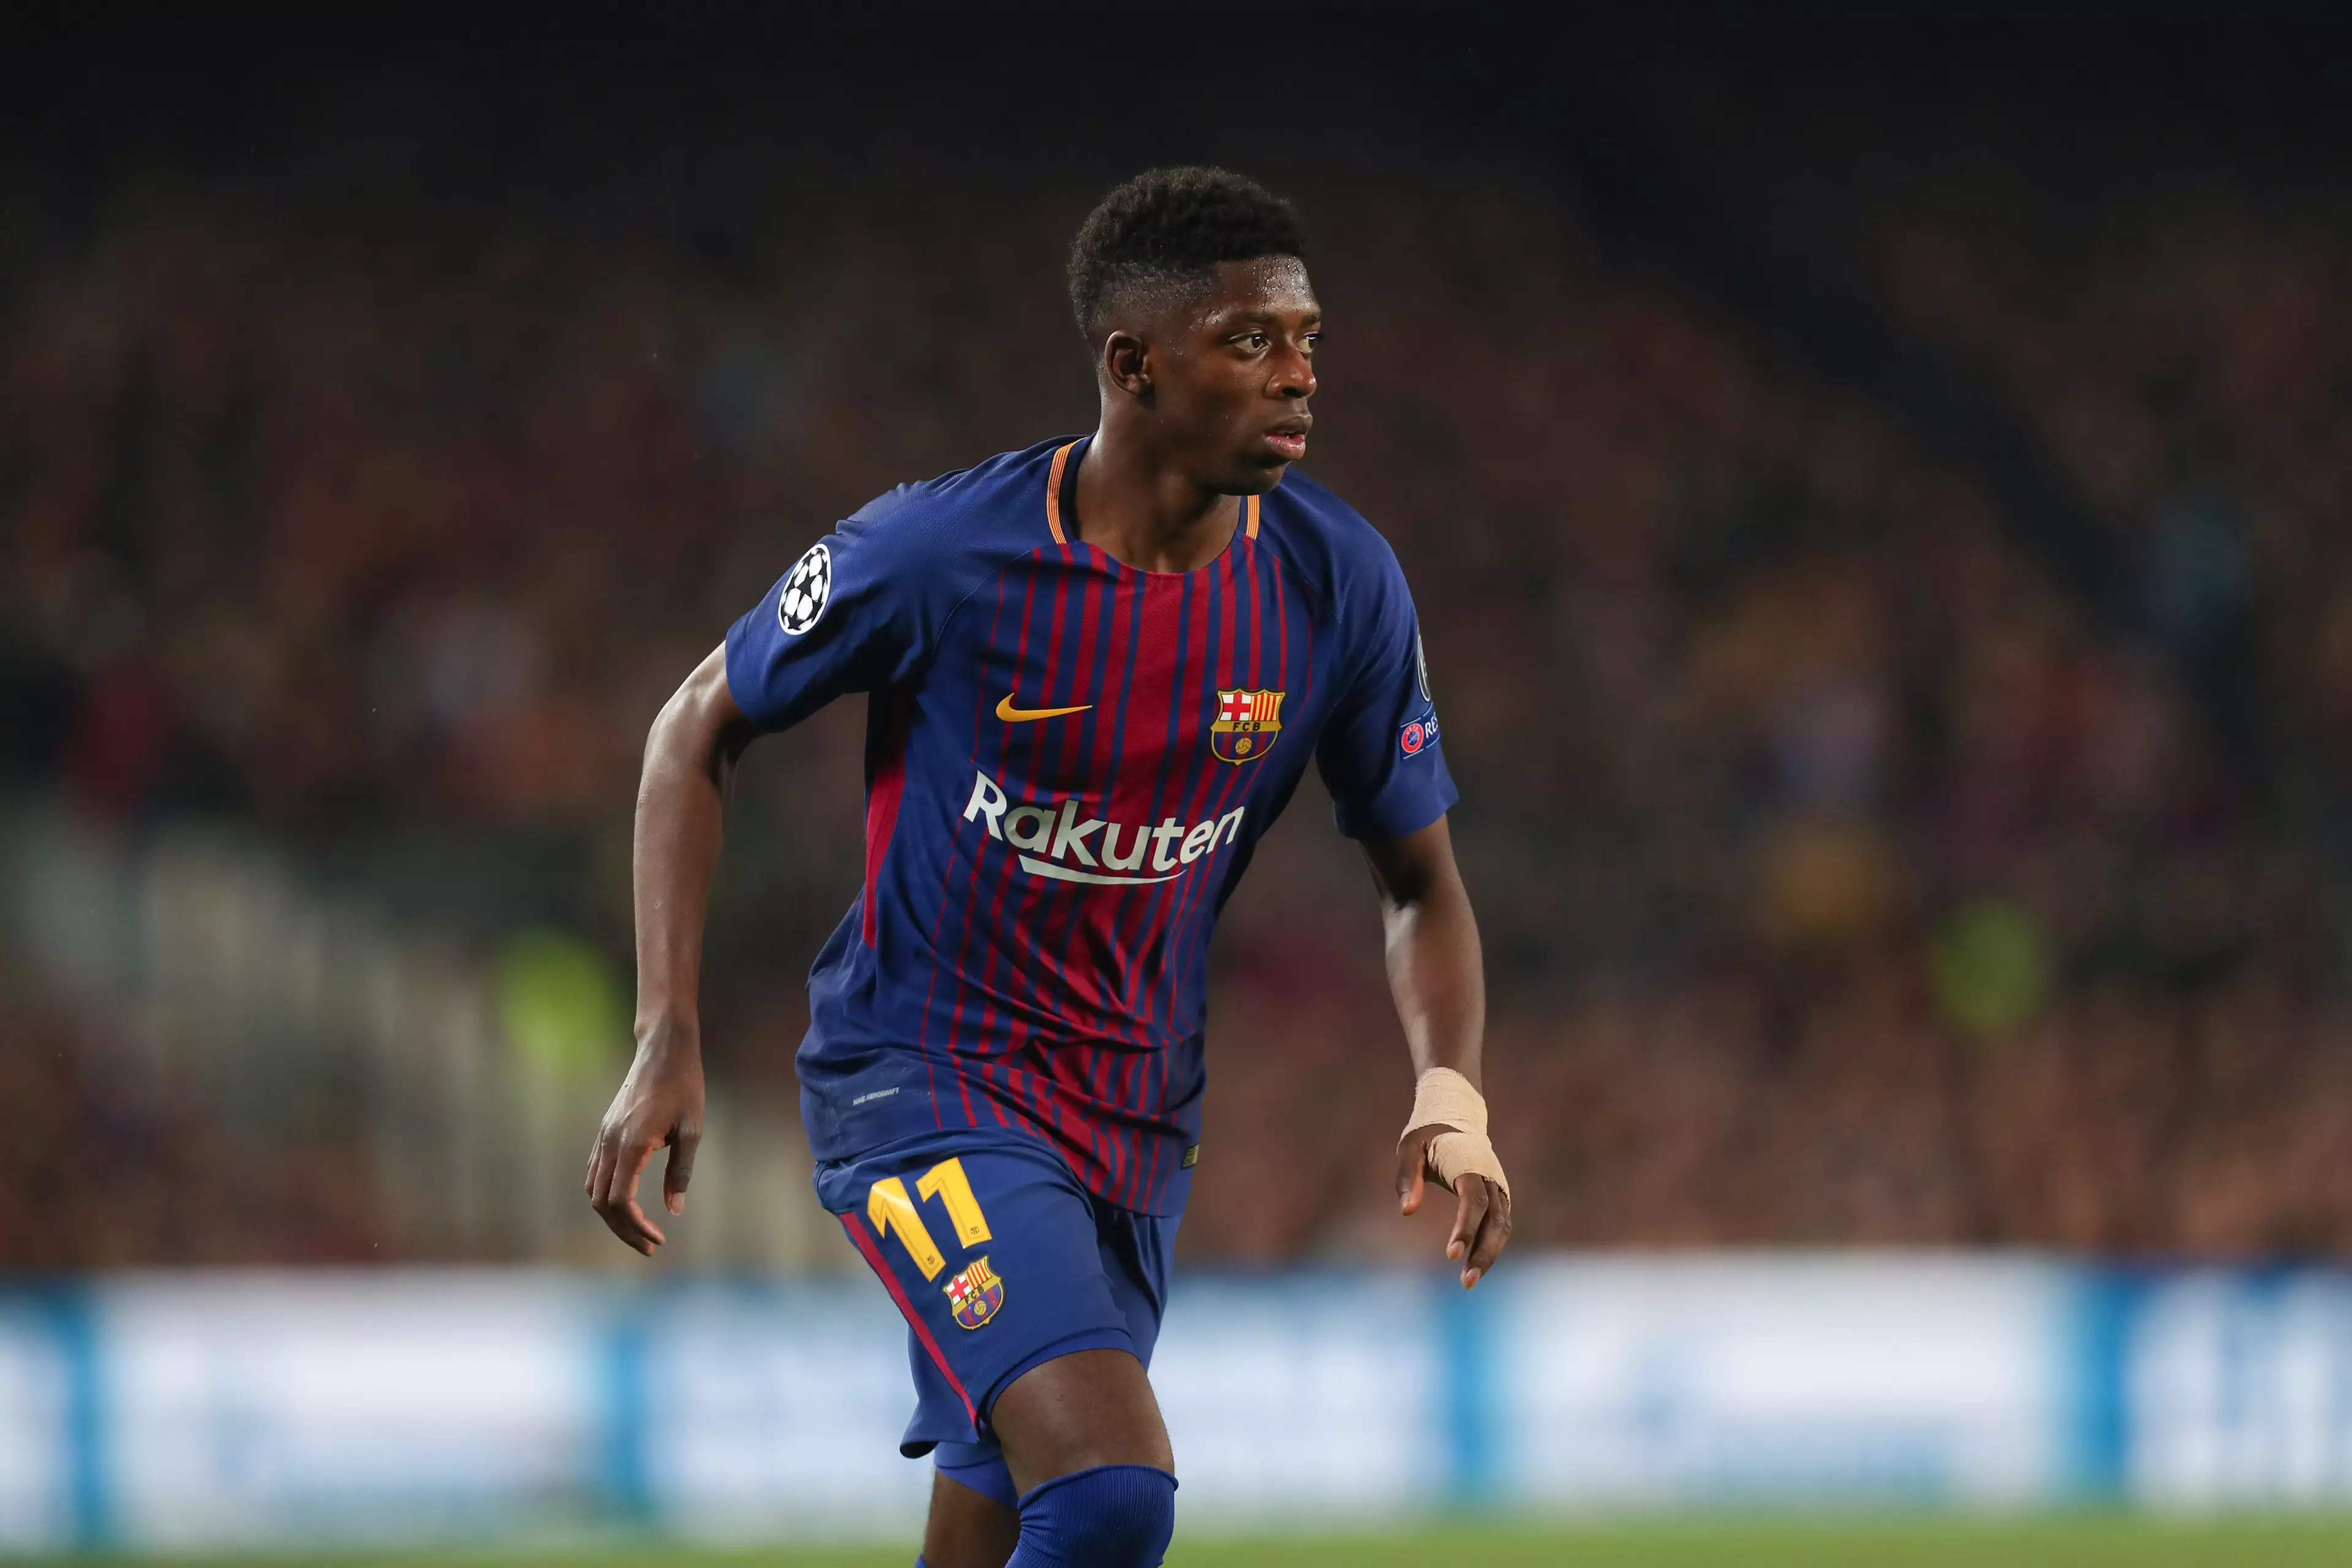 Dembele in action for Barcelona. Image: PA